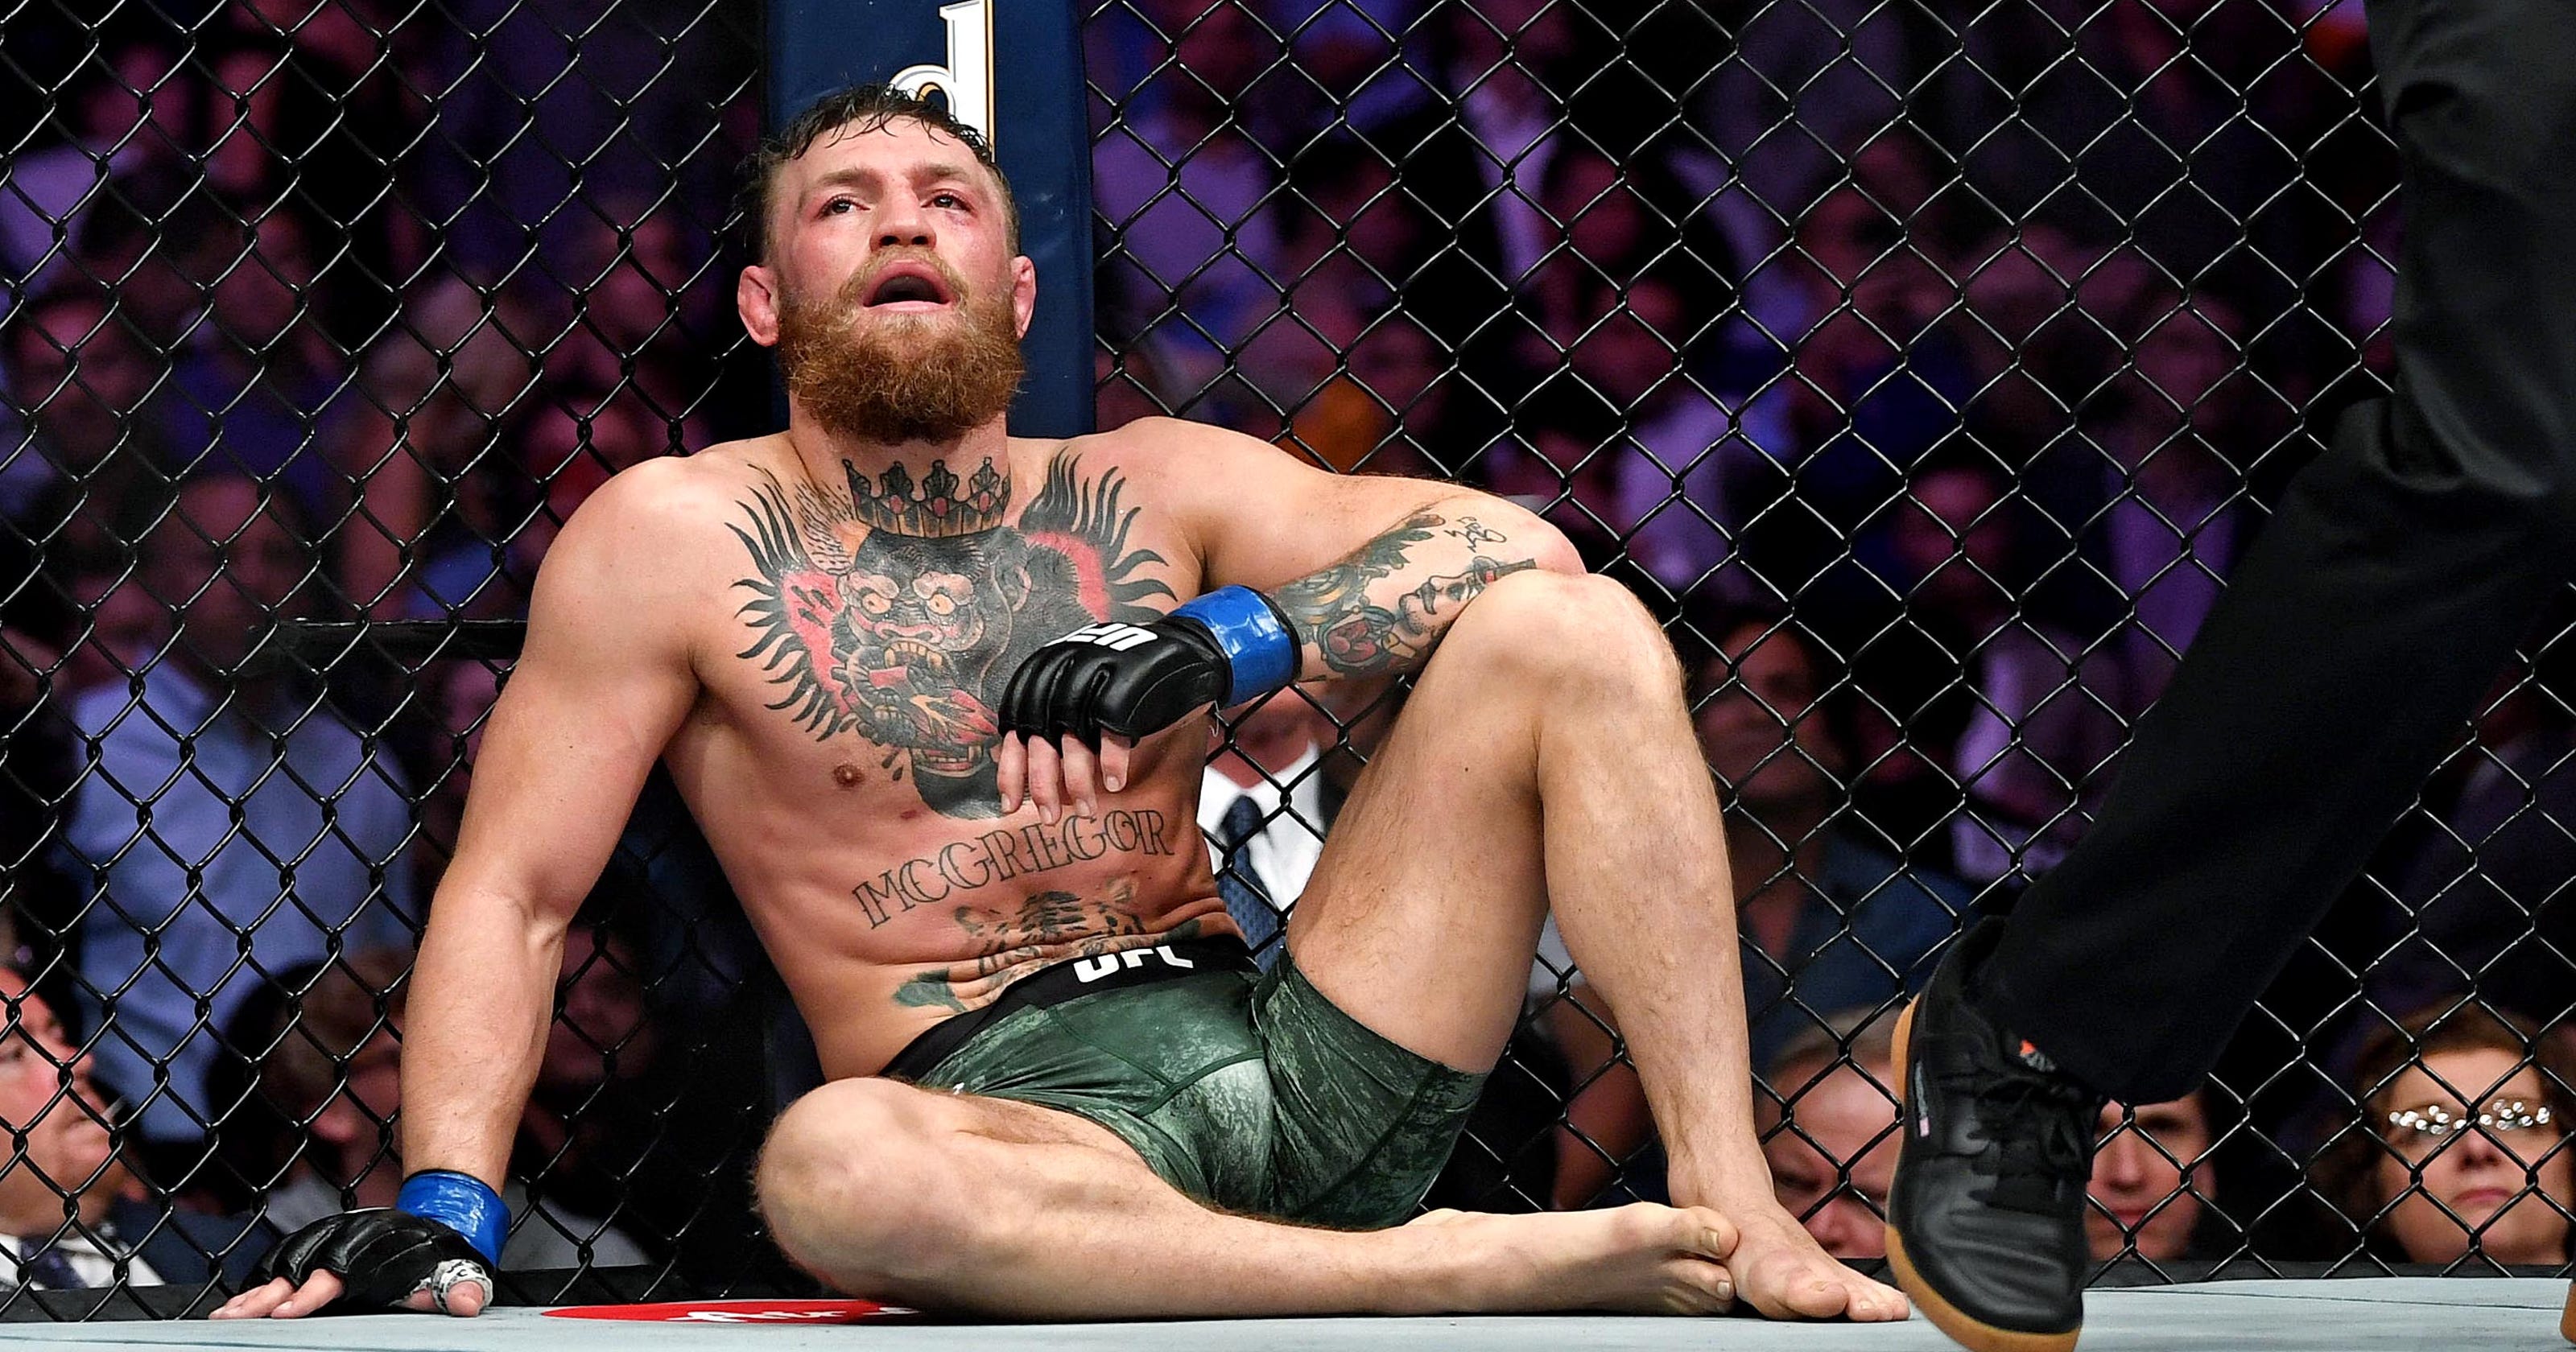 UFC: Conor McGregor's latest loss puts him on path to pro wrestling